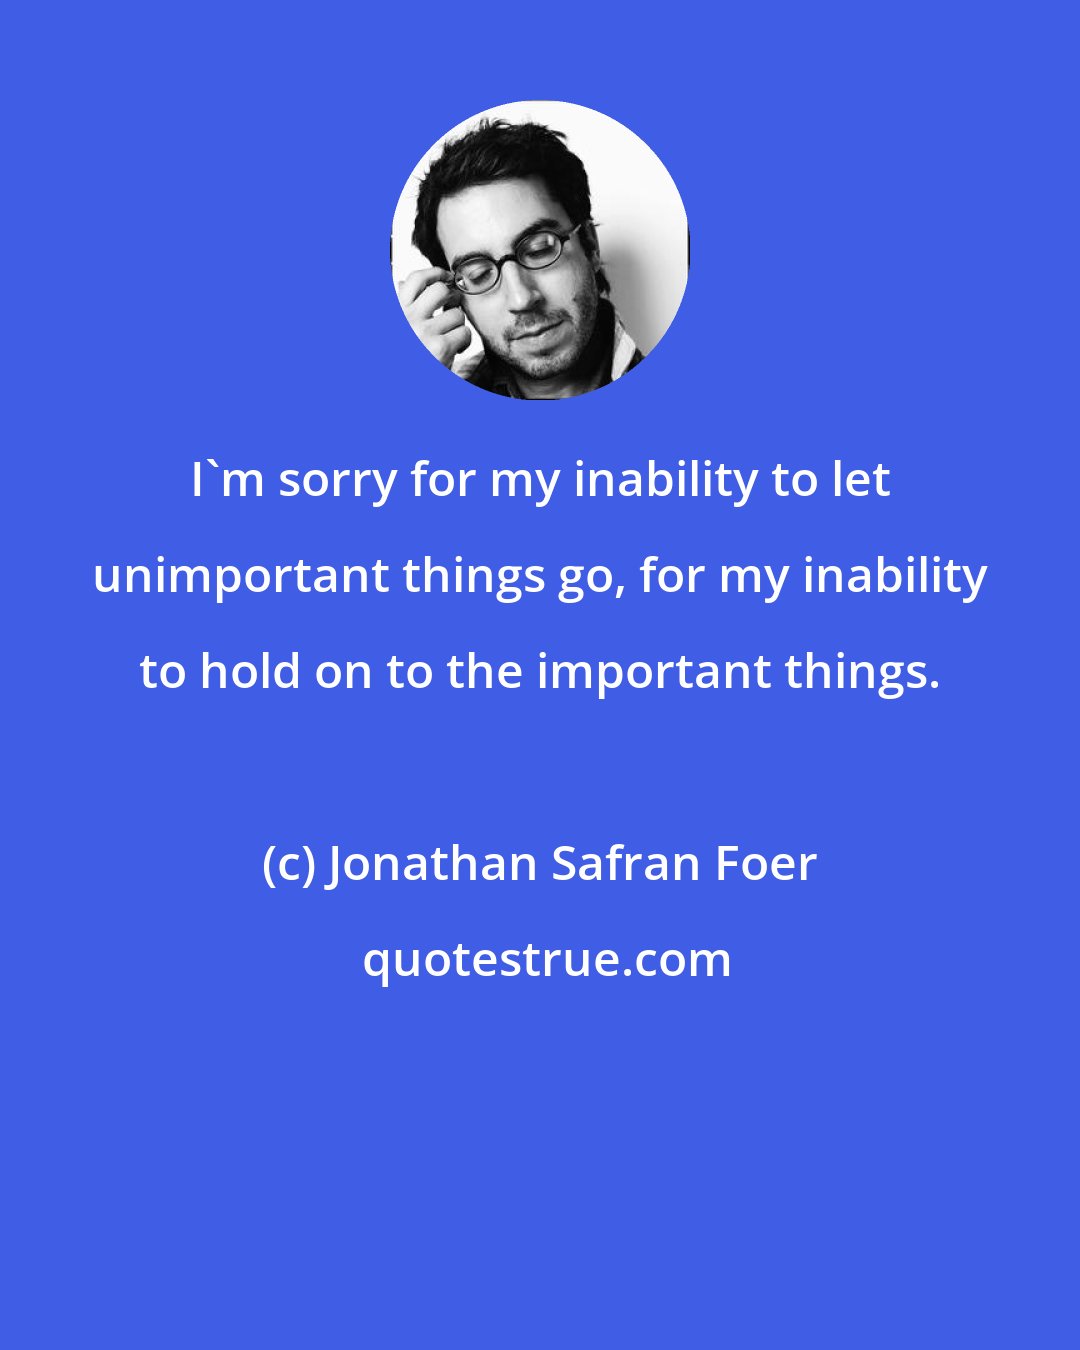 Jonathan Safran Foer: I'm sorry for my inability to let unimportant things go, for my inability to hold on to the important things.